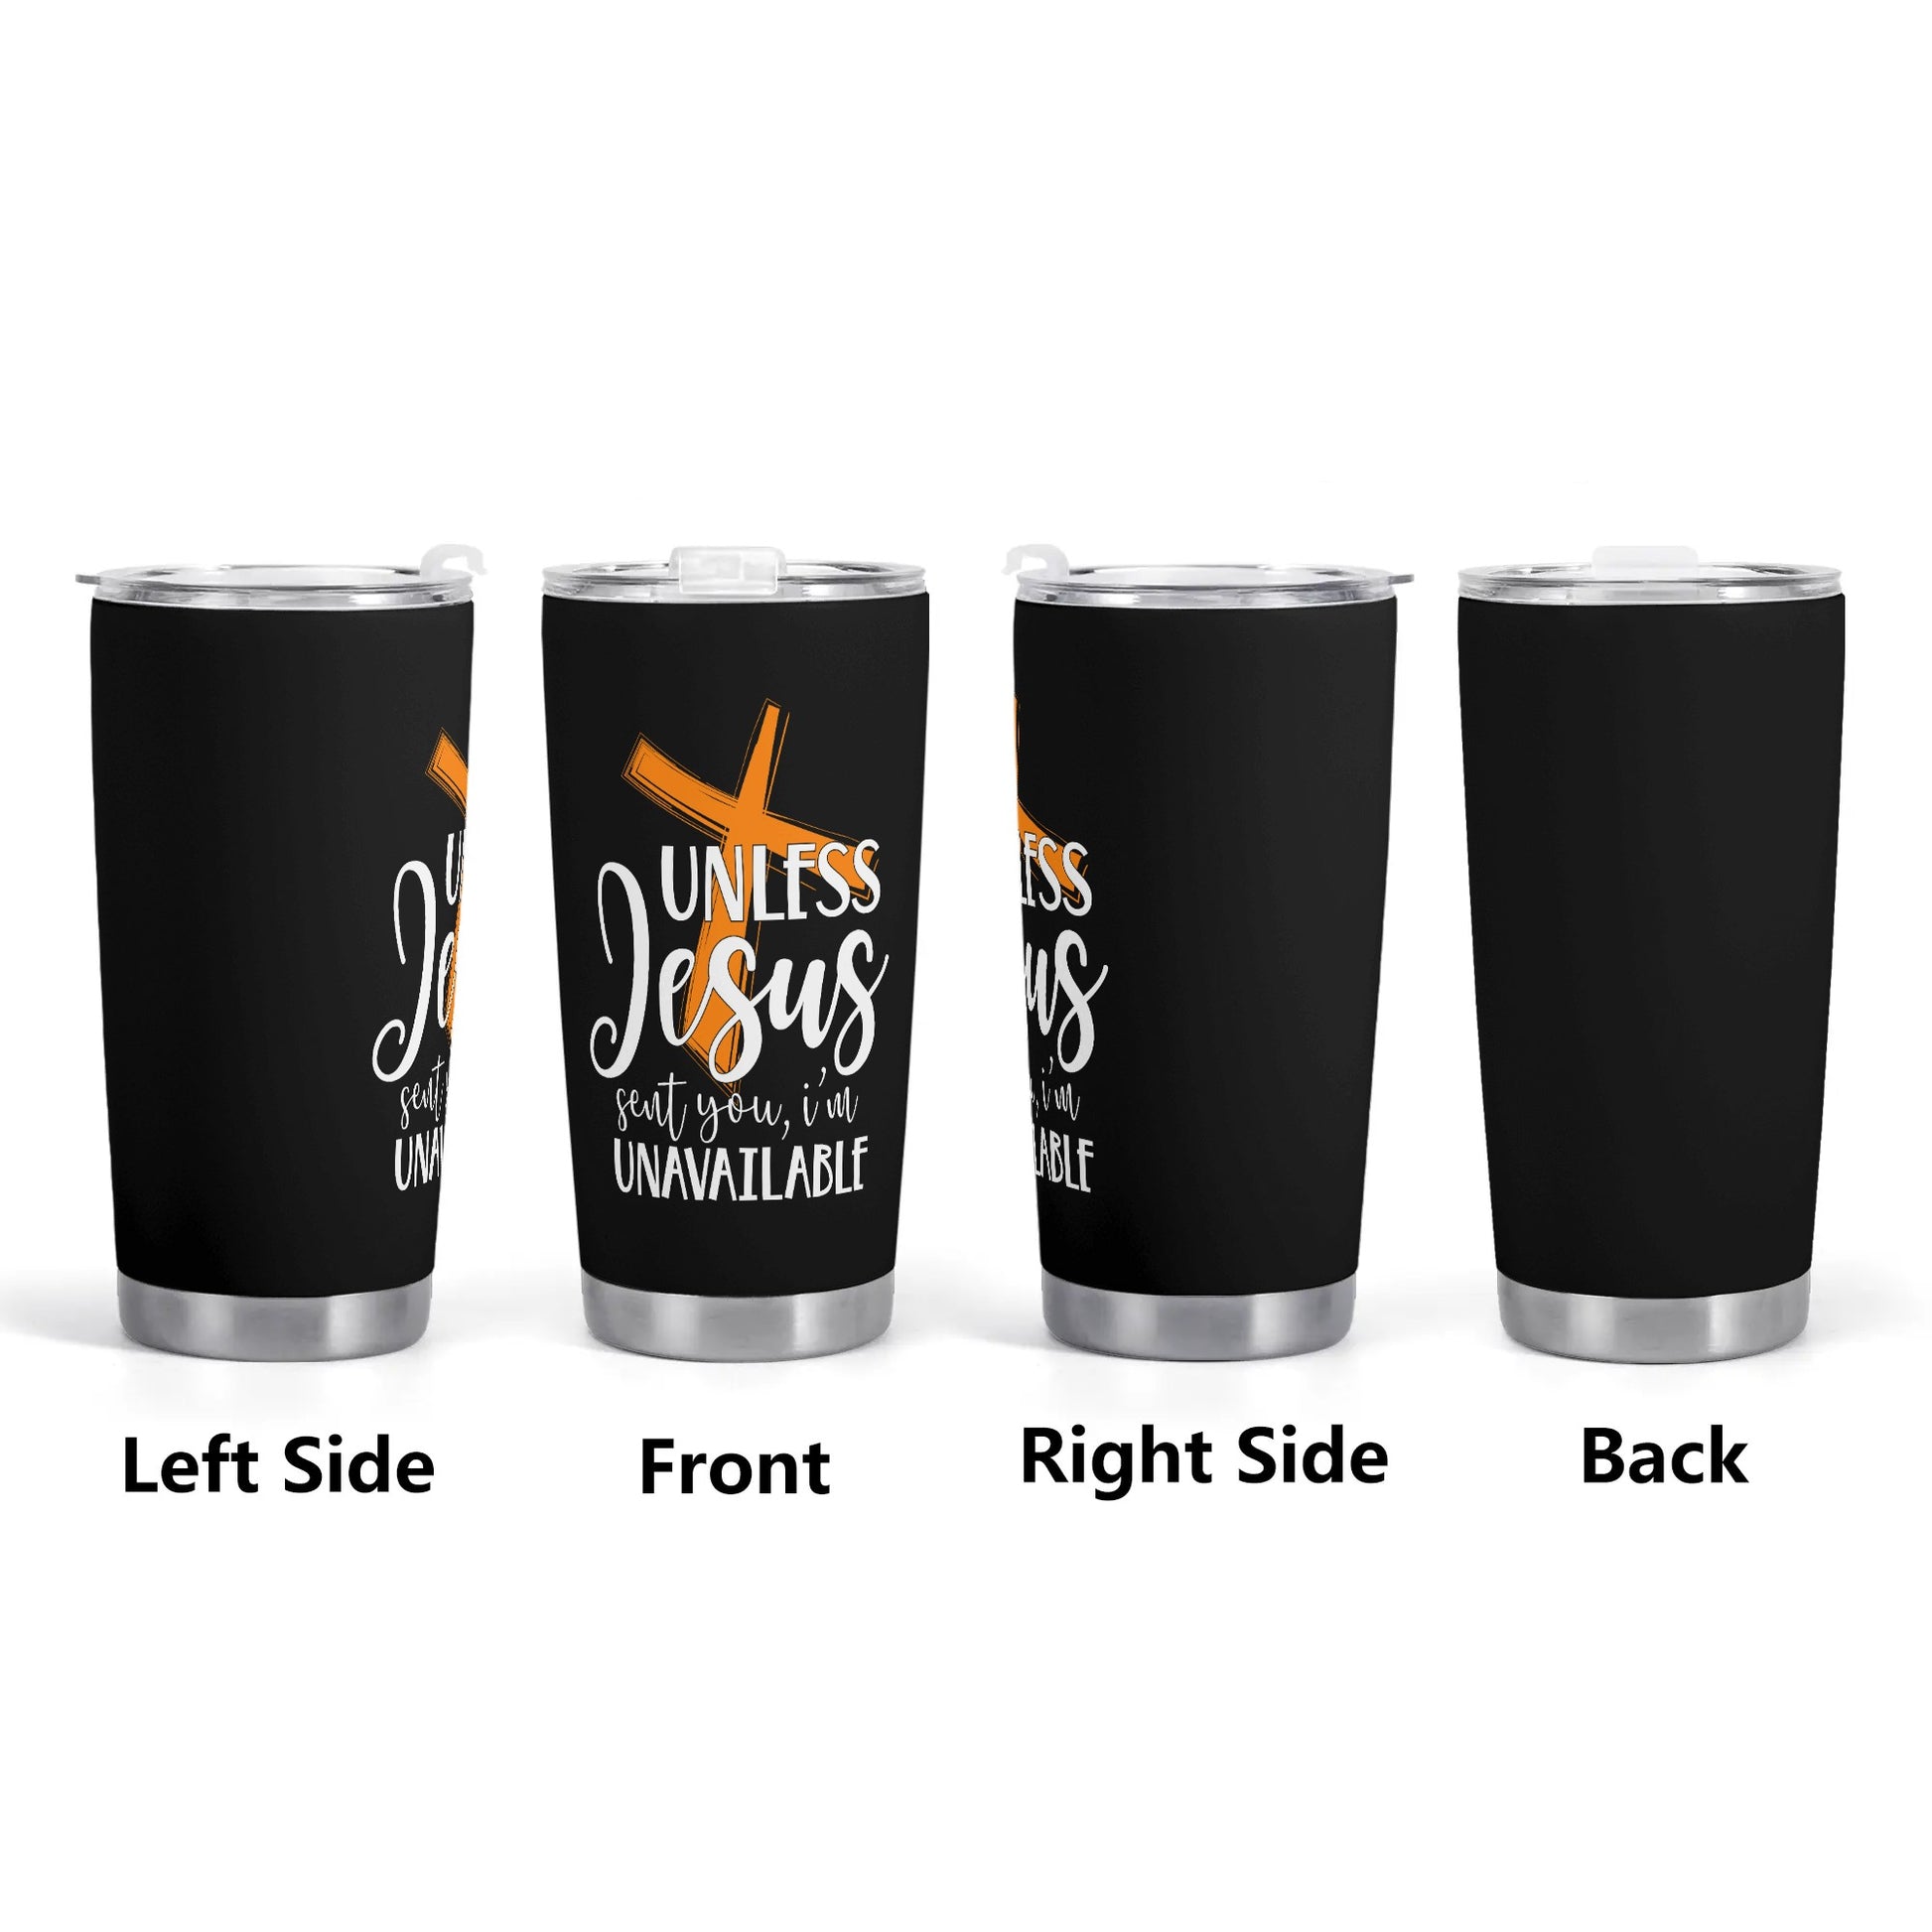 Unless Jesus Sent You Im Unavailable Christian Stainless Steel Tumbler 20oz popcustoms